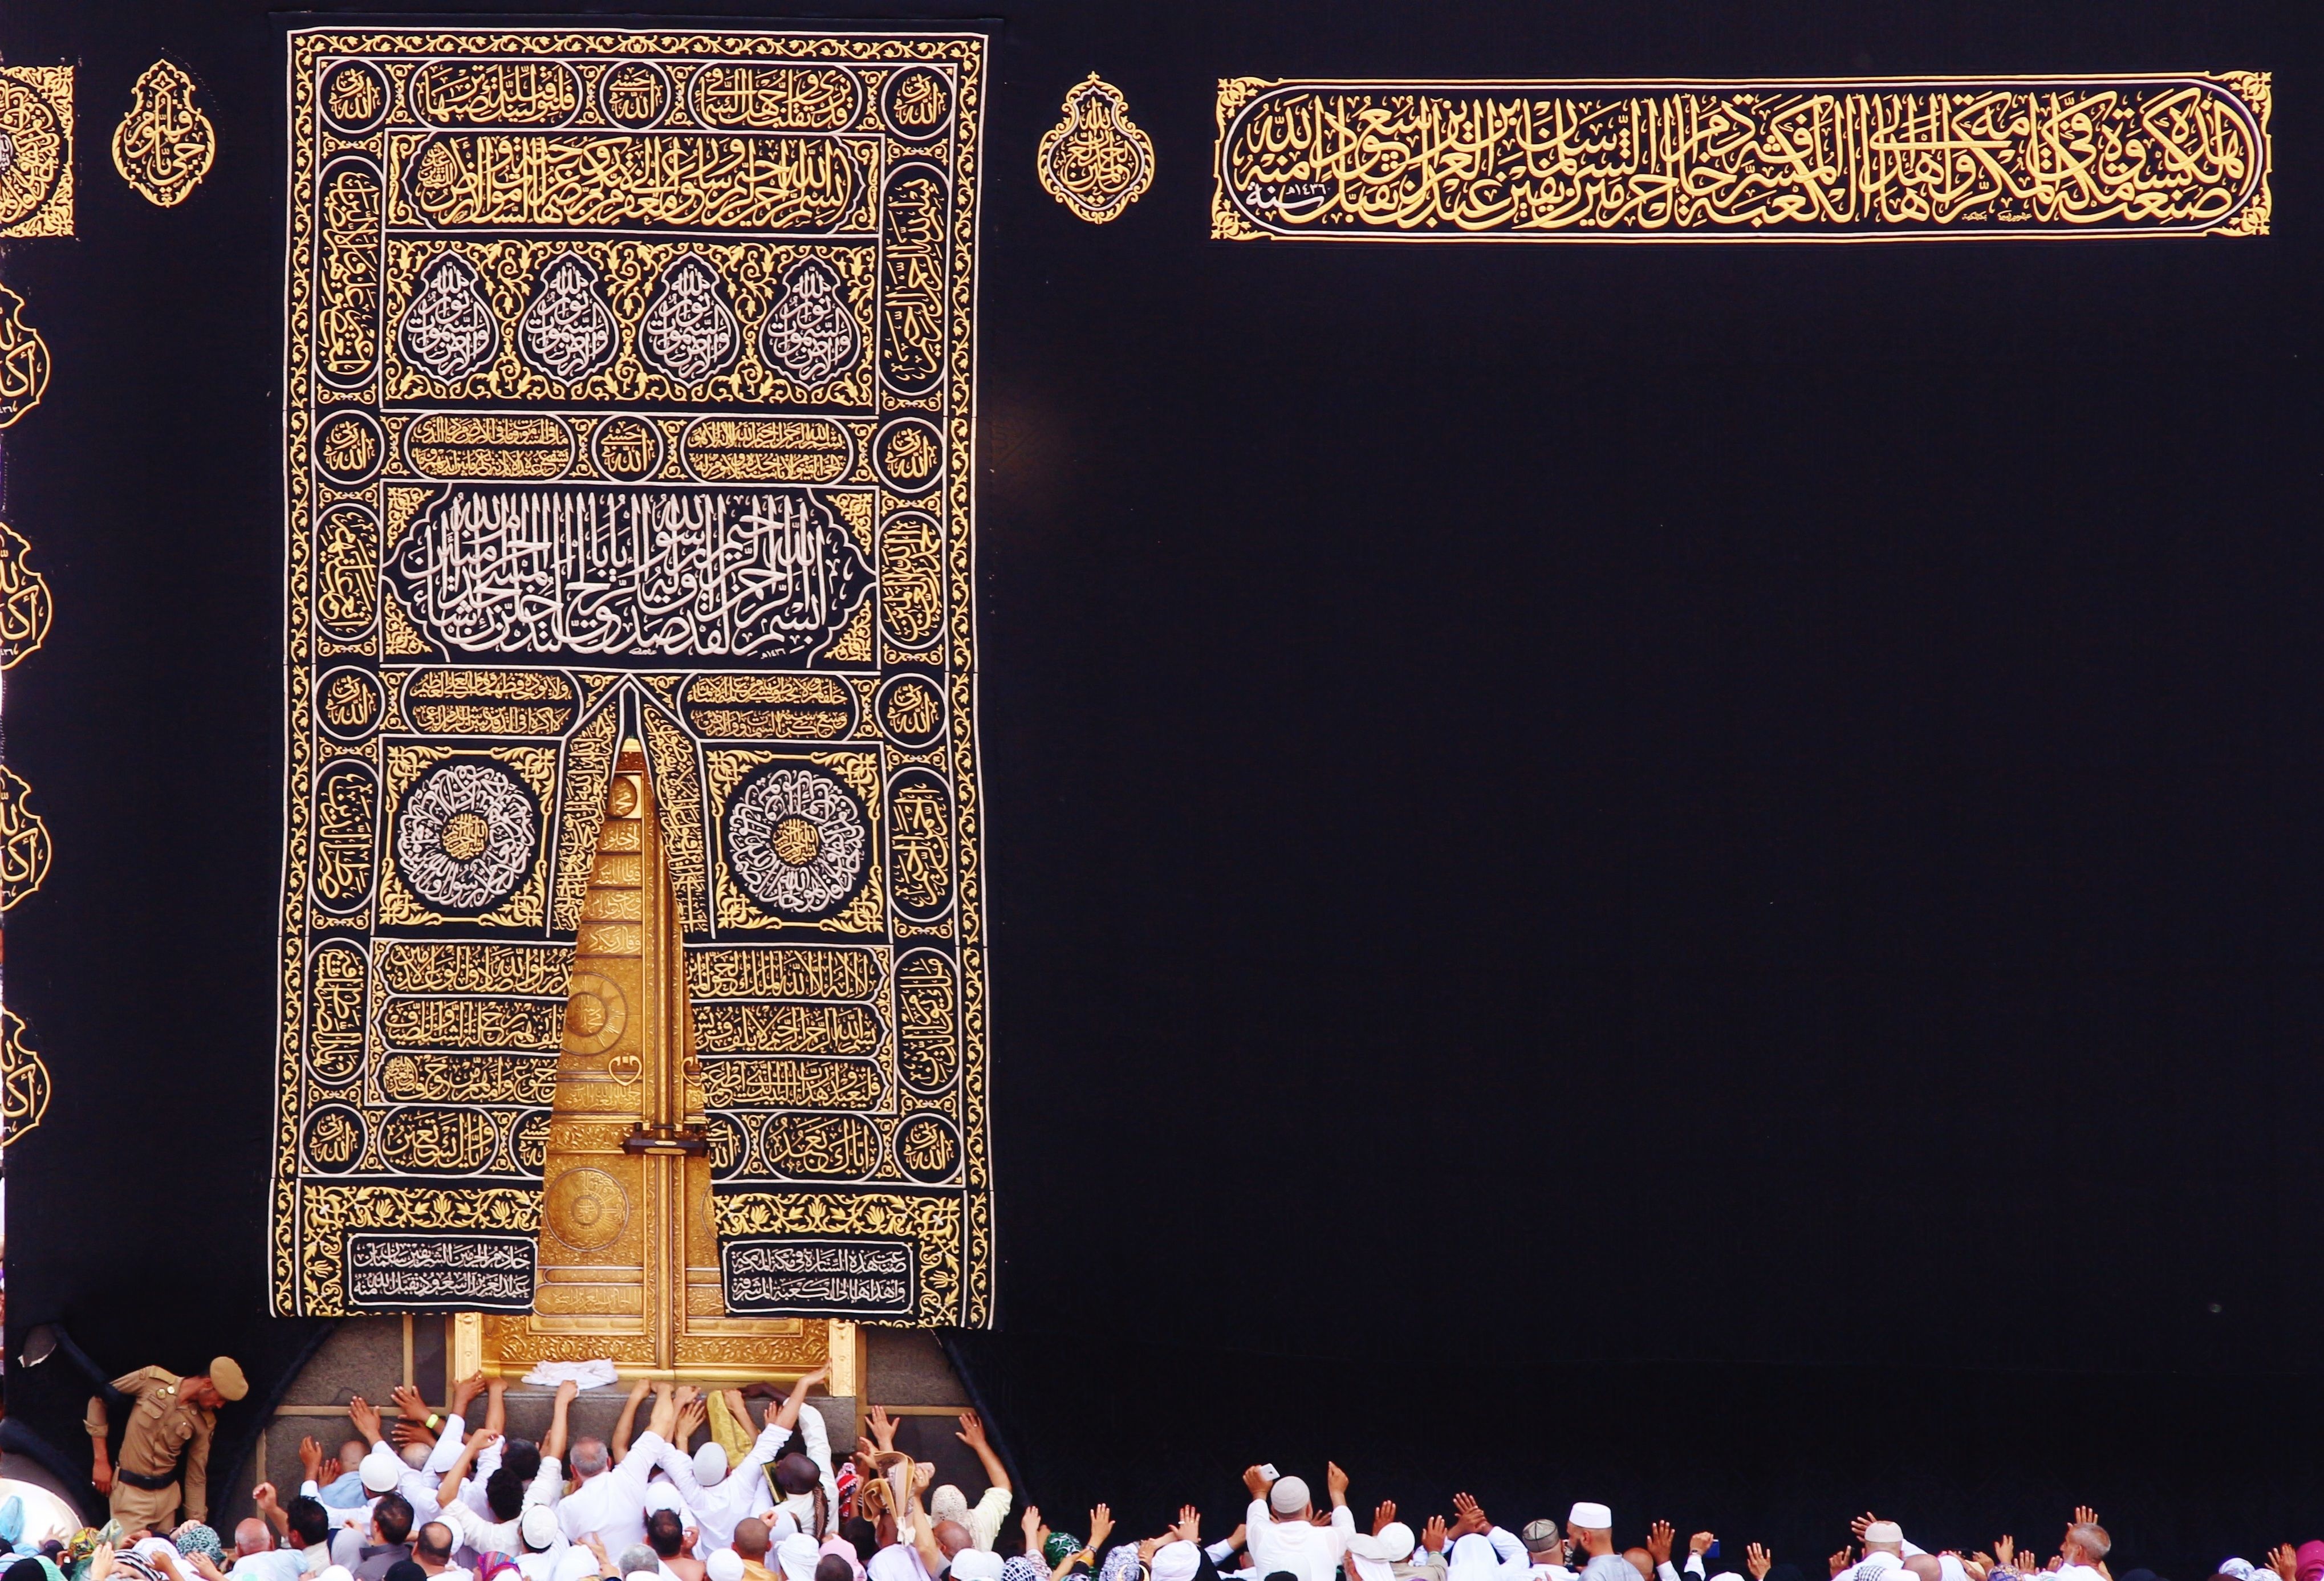 A large black textile densely embroidered in places with gold and silver Arabic calligraphy forming geometric designs, including the shape of a door, partially covers an actual door. Worshippers dressed in white gather along the bottom edge of the image.